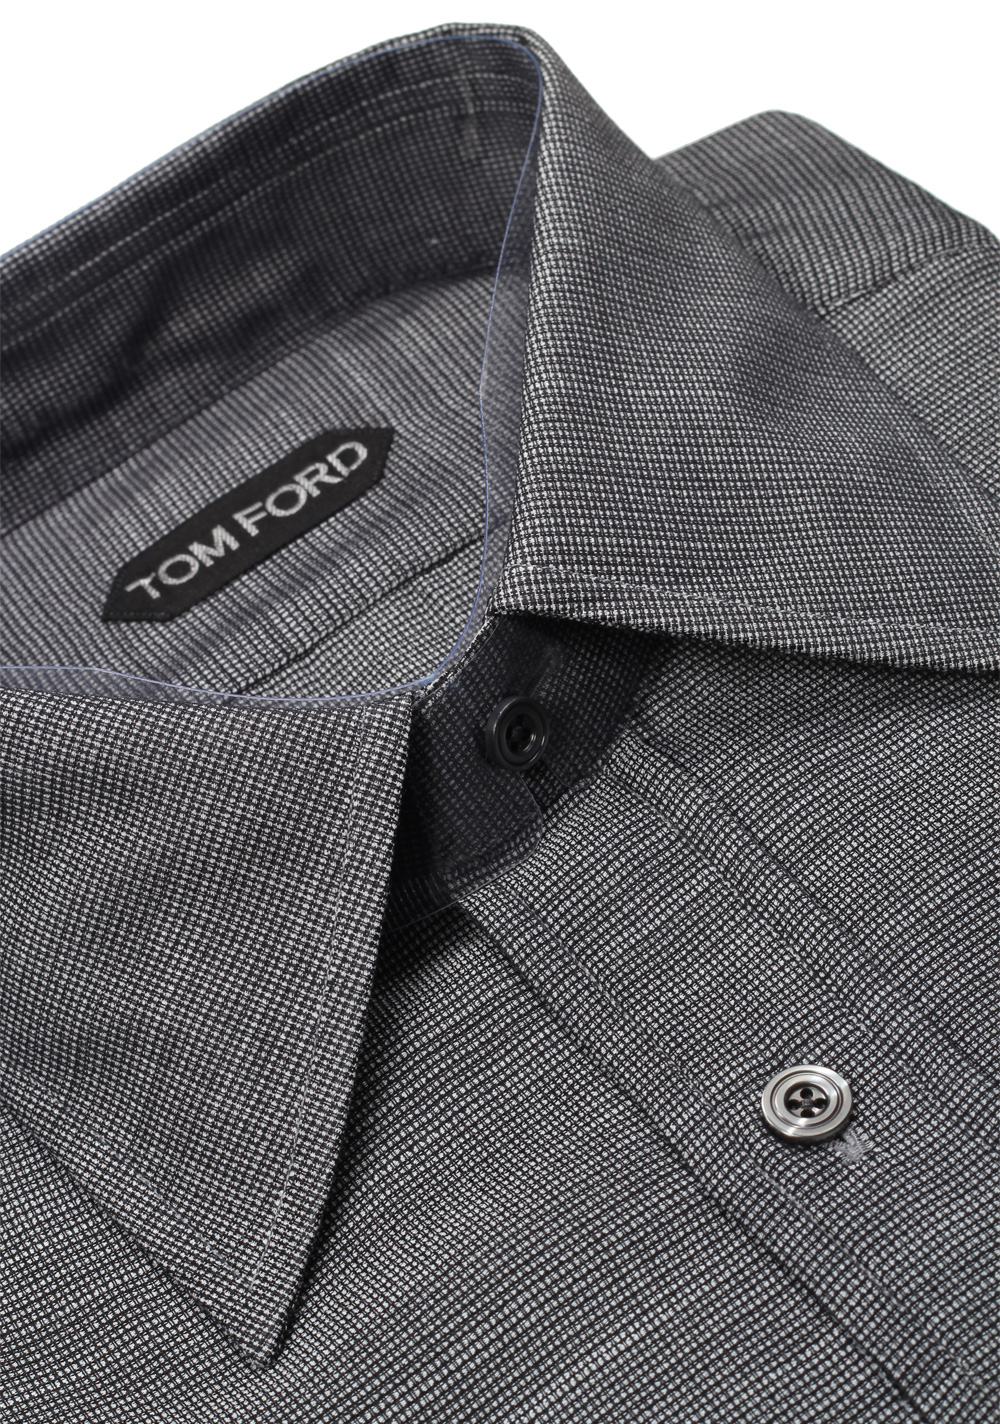 TOM FORD Patterned Gray Shirt Size 40 / 15,75 U.S. | Costume Limité